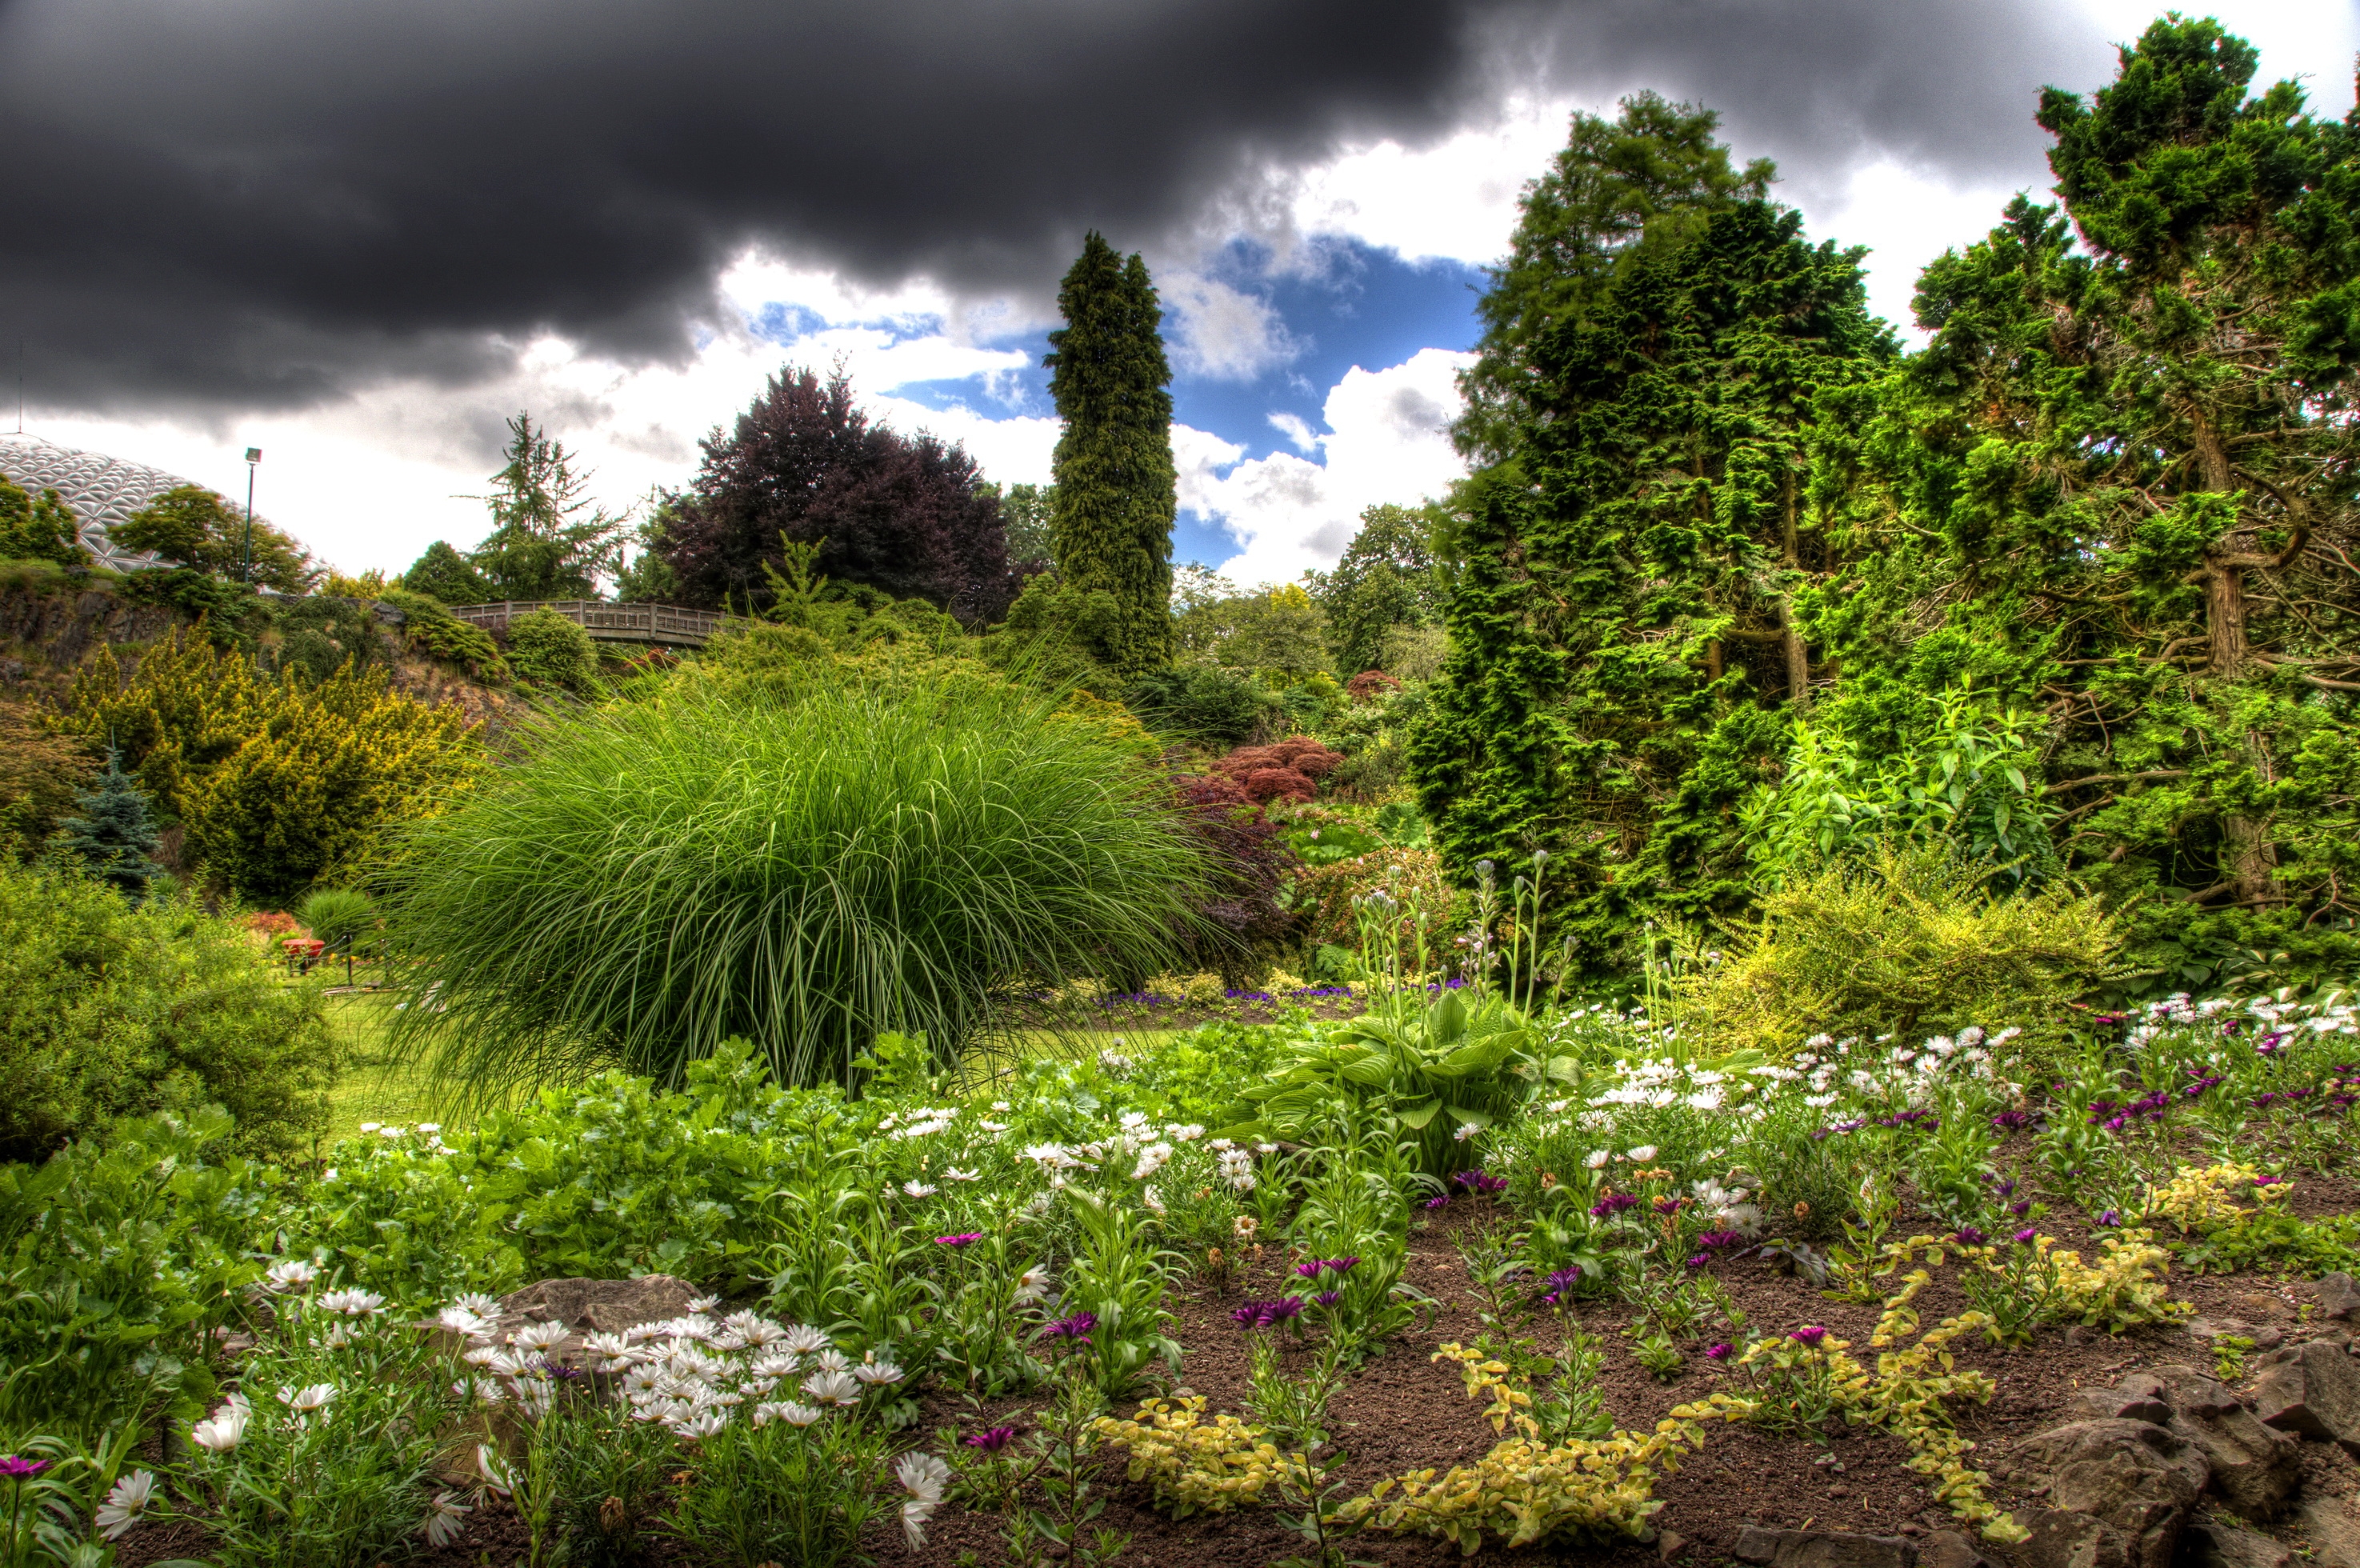 brightly, nature, sky, clouds, green, vegetation, garden, mainly cloudy, overcast